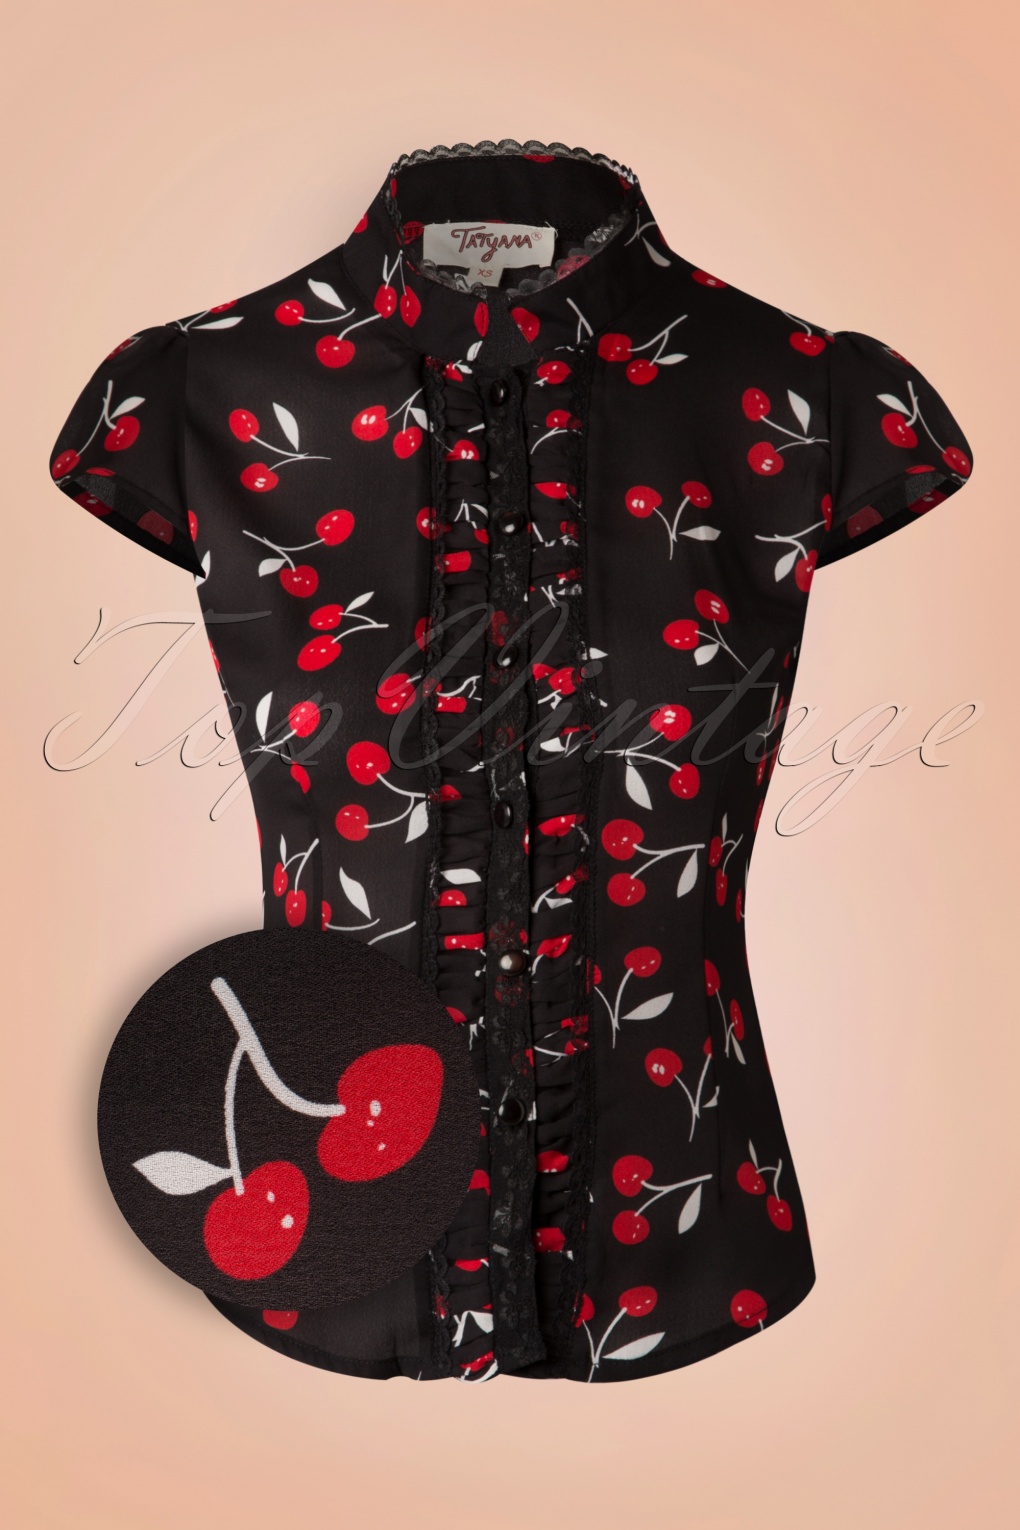 Ongekend 50s Lucy Cherry Blouse in Black KN-49